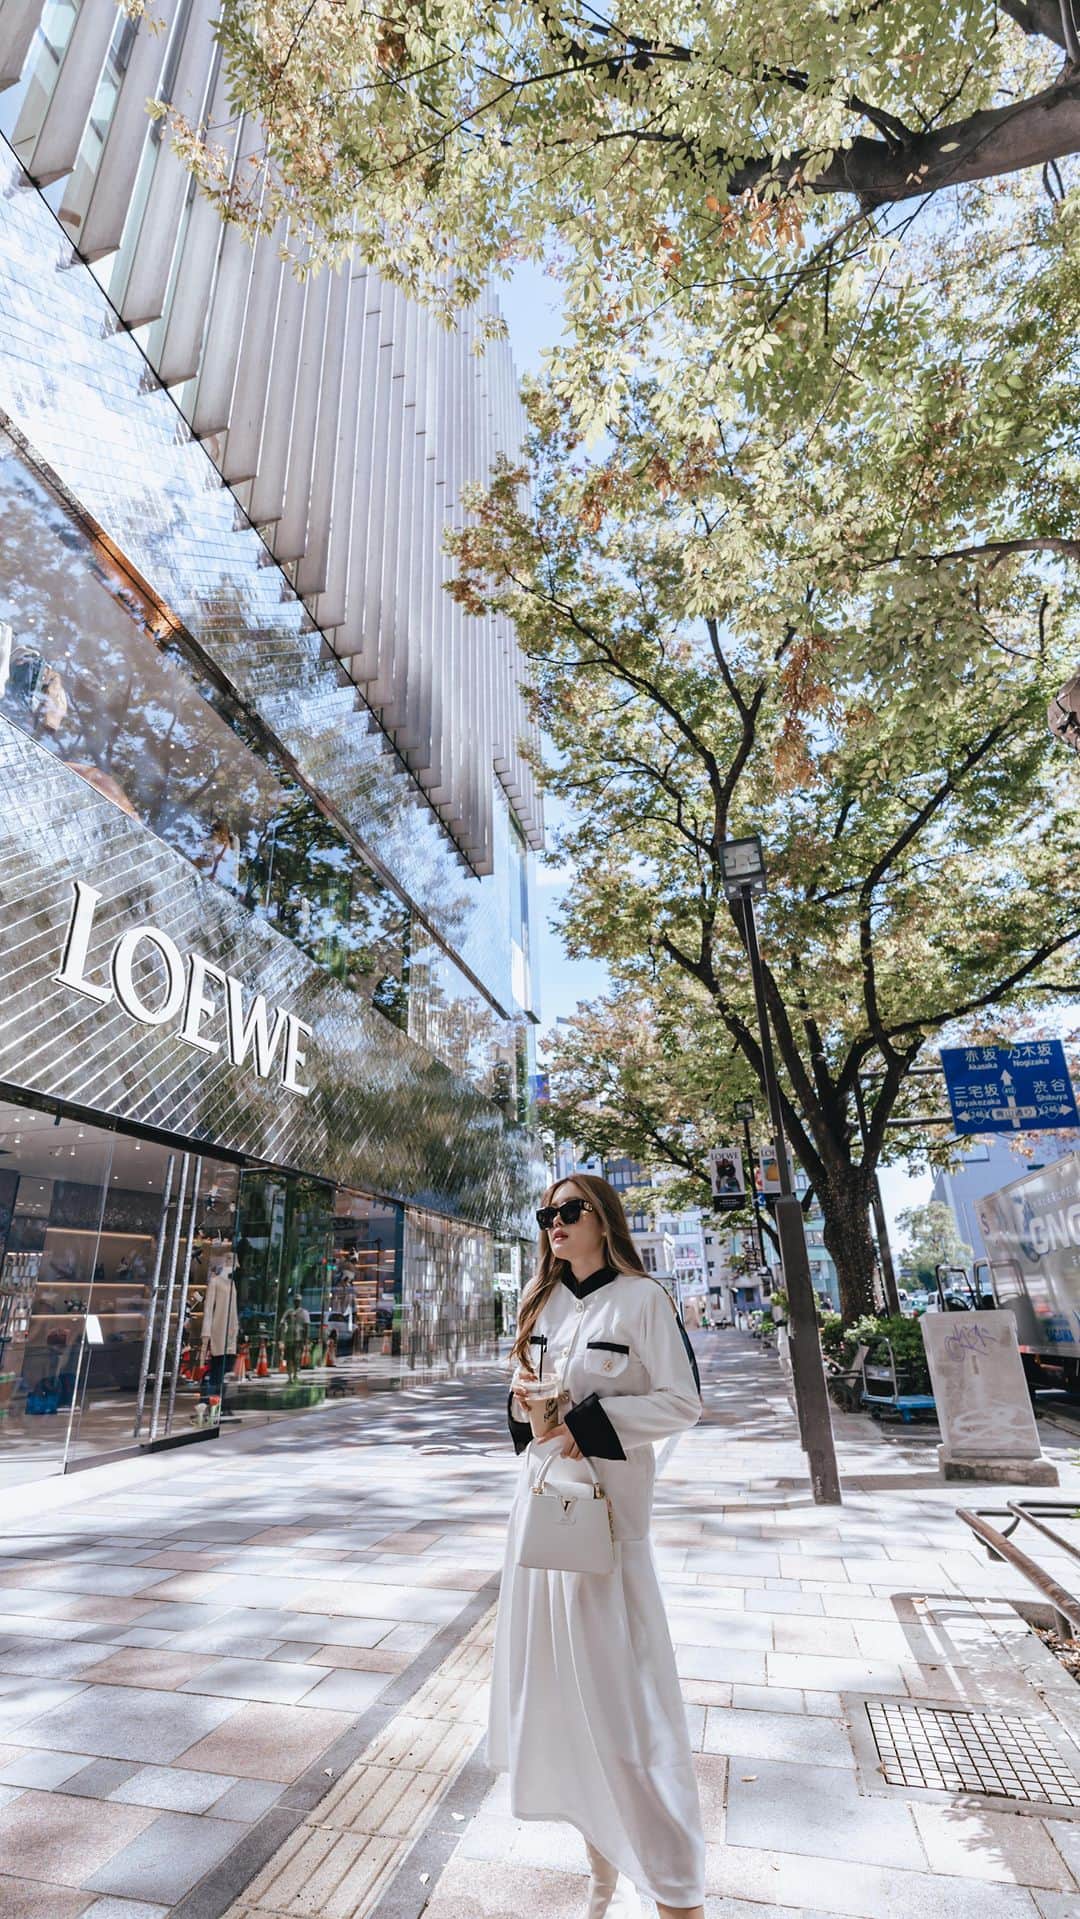 Stella Leeのインスタグラム：「Omotesando and Harajuku are some of my favorite spots in Tokyo to take pictures because there are so many cute spots. The serene Meiji Shrine, the colorful Takeshita street, the luxurious shopping street of Omotesando. All are within walking distance 🫶🏻  What’s your favorite area in Tokyo?   I share about my TOKYO PHOTO MAPS on www.stellartravelguide.com, feel free to check it out 🇯🇵」